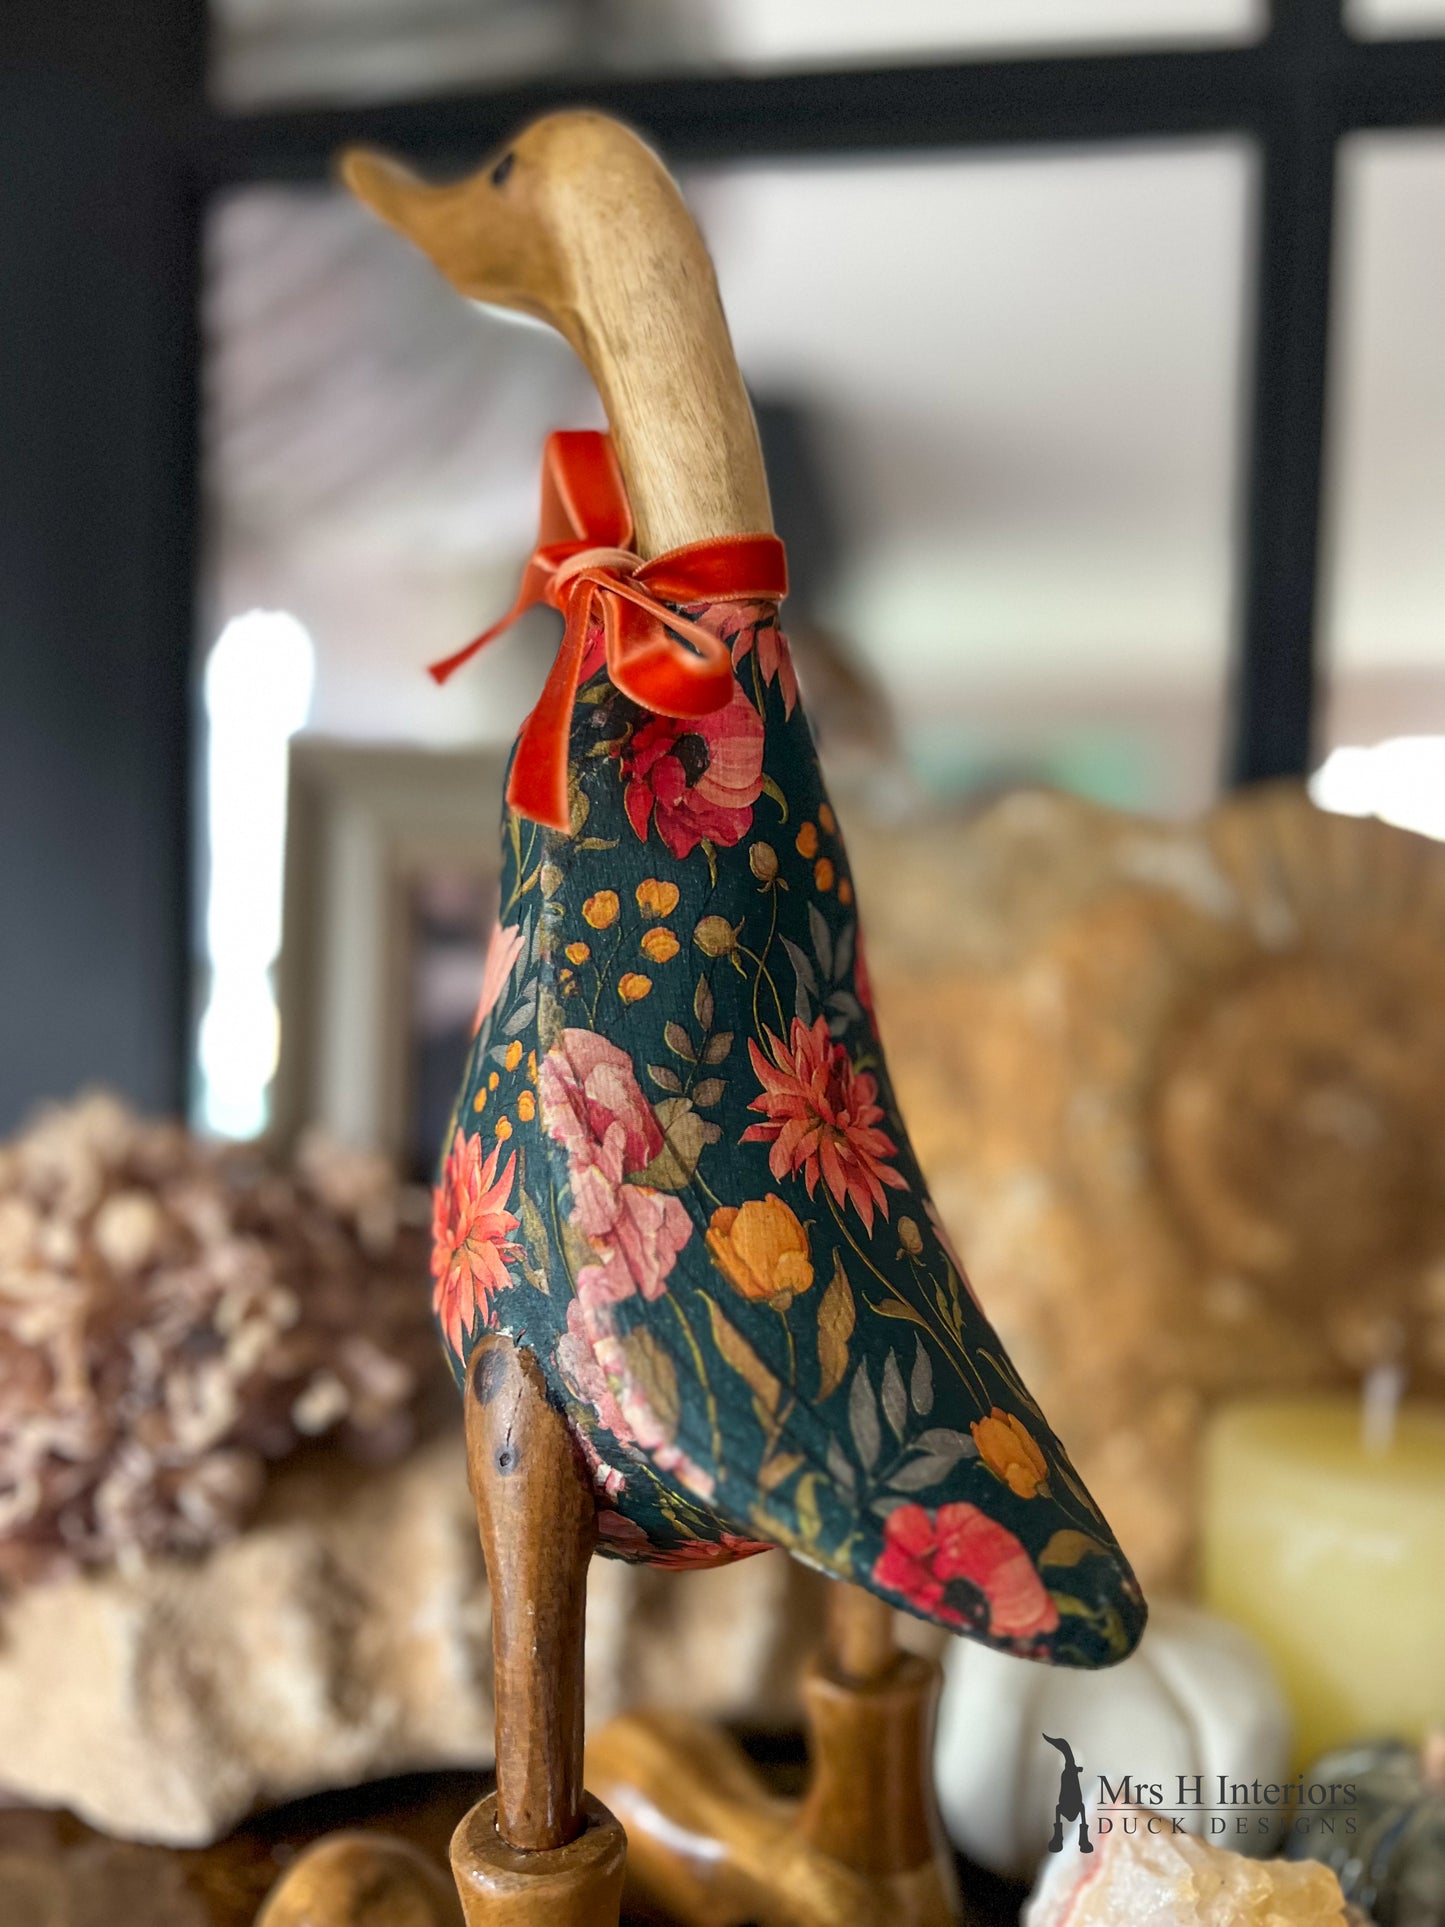 Emmy, the emerald, floral, autumnal Decorated Wooden Duck in Boots by Mrs H the Duck Lady